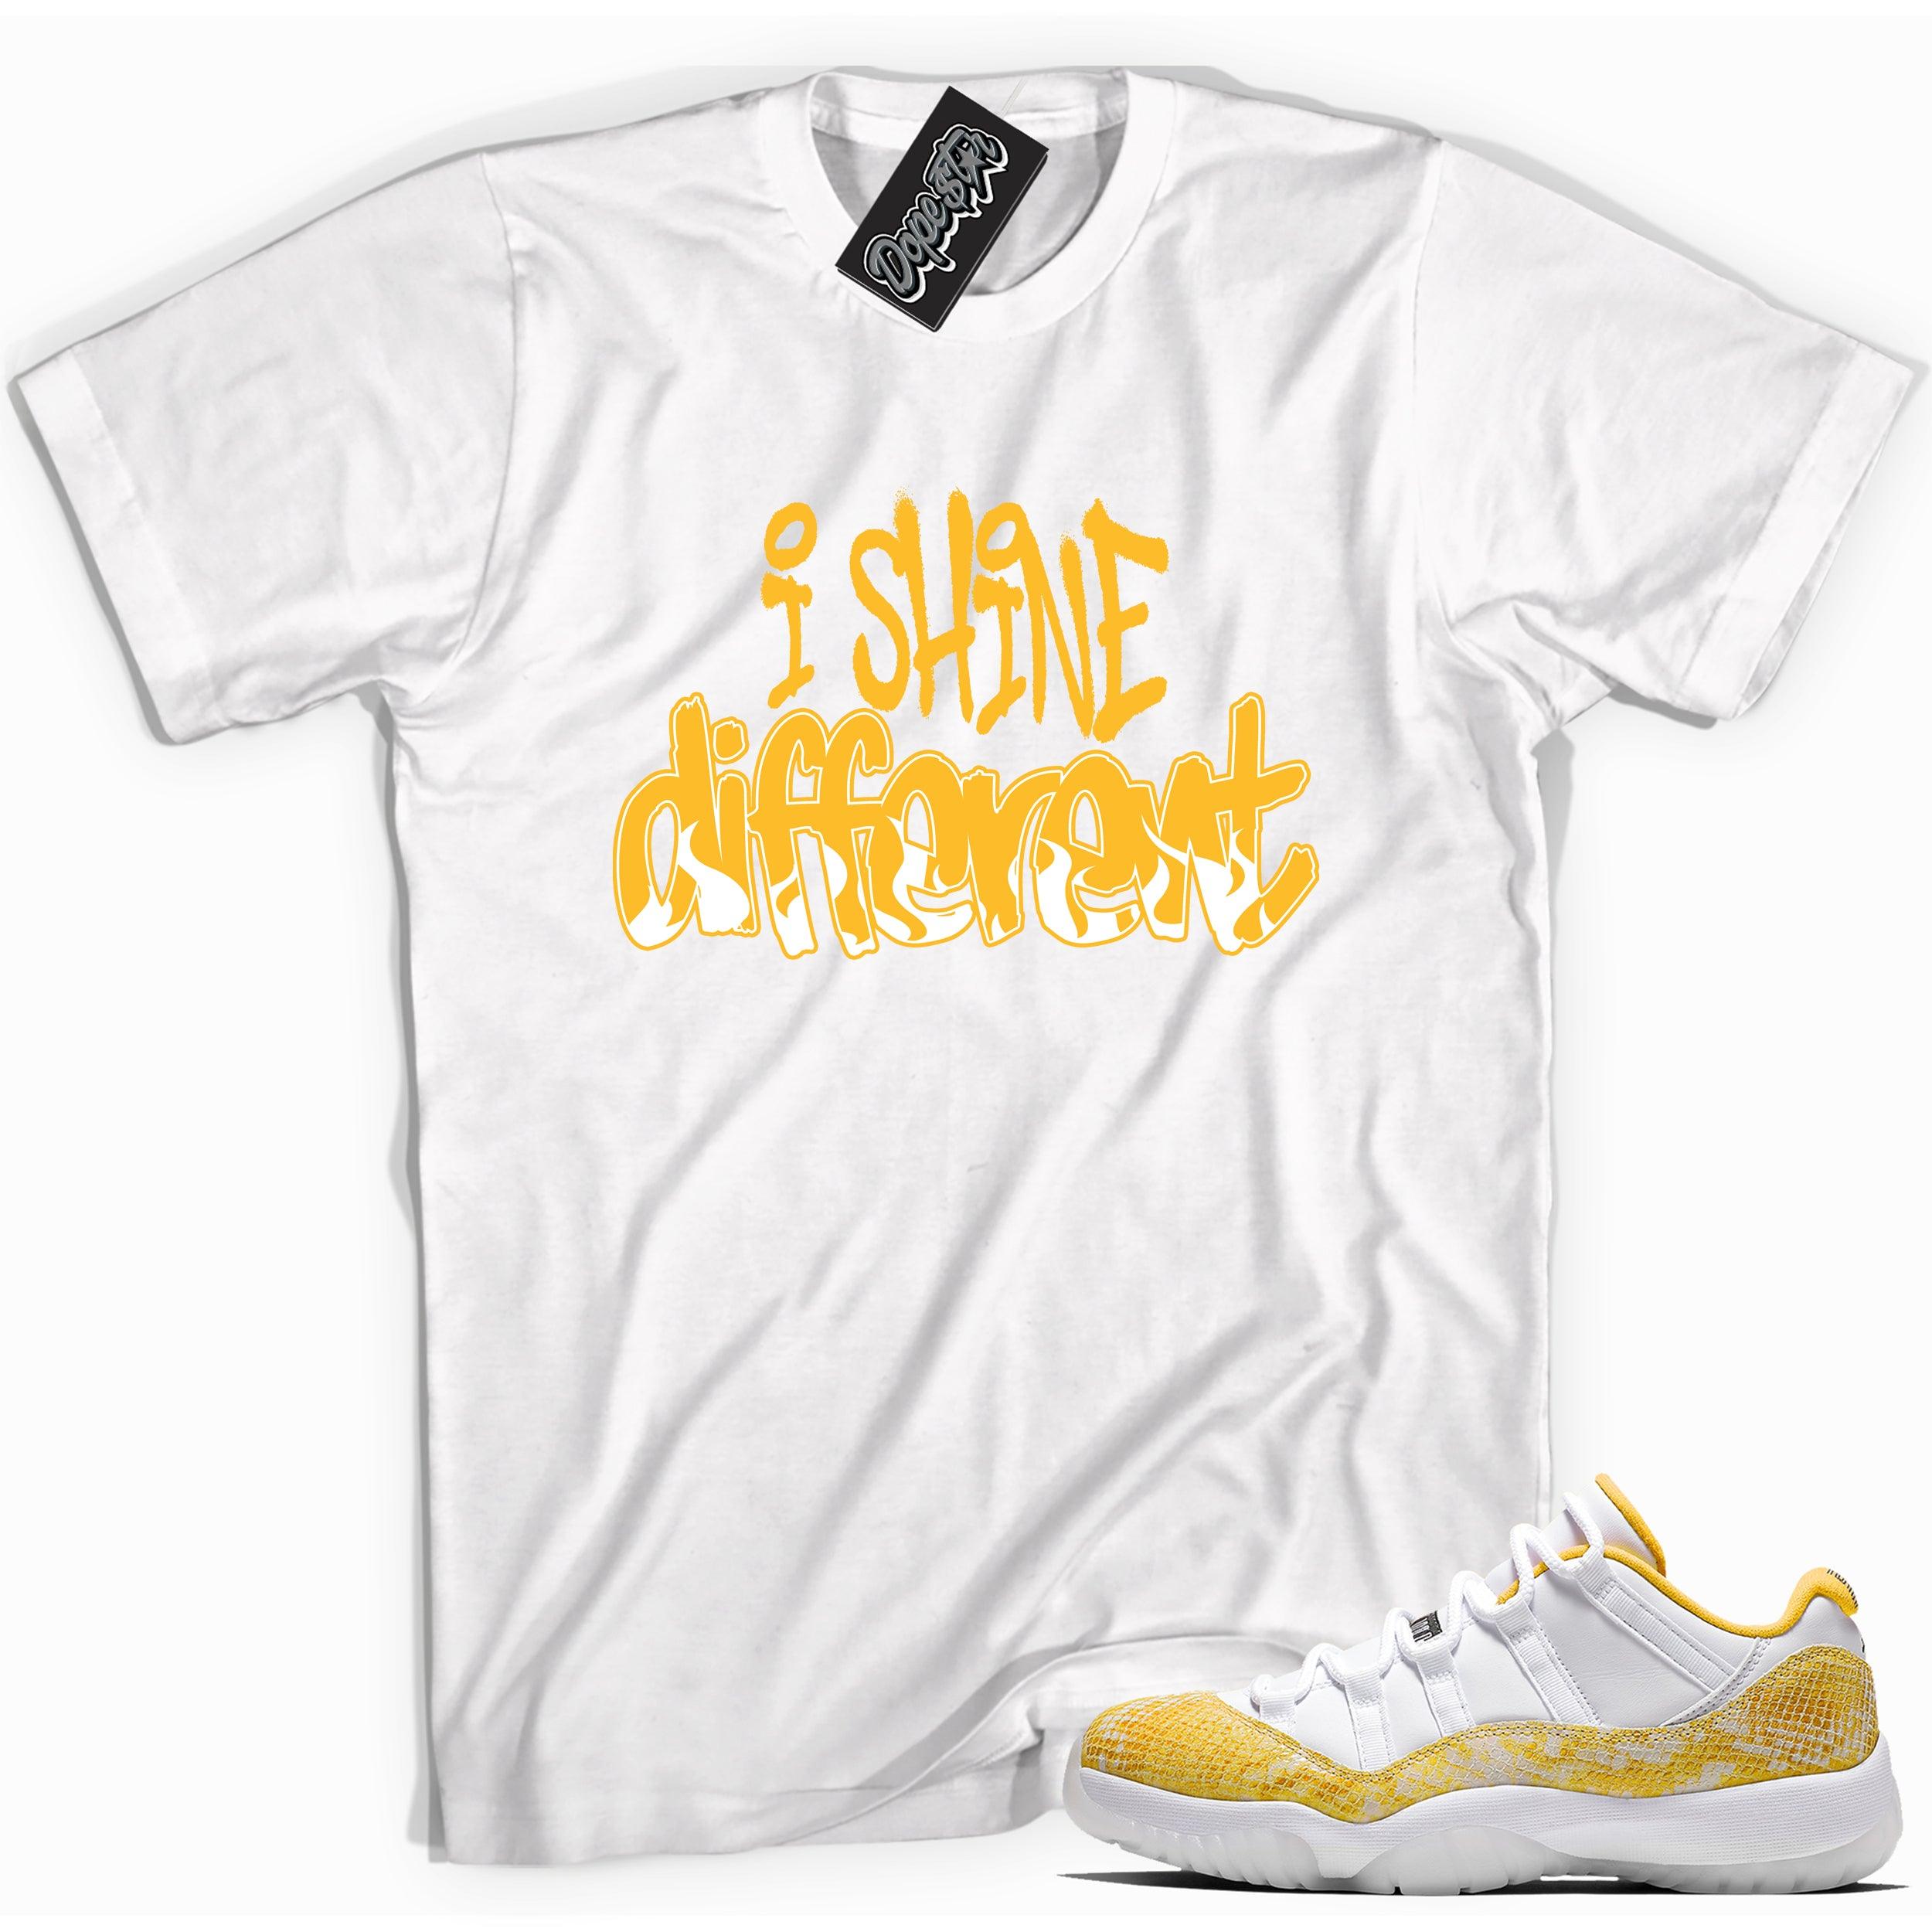 Cool white graphic tee with 'i shine different' print, that perfectly matches Air Jordan 11 Low Yellow Snakeskin sneakers